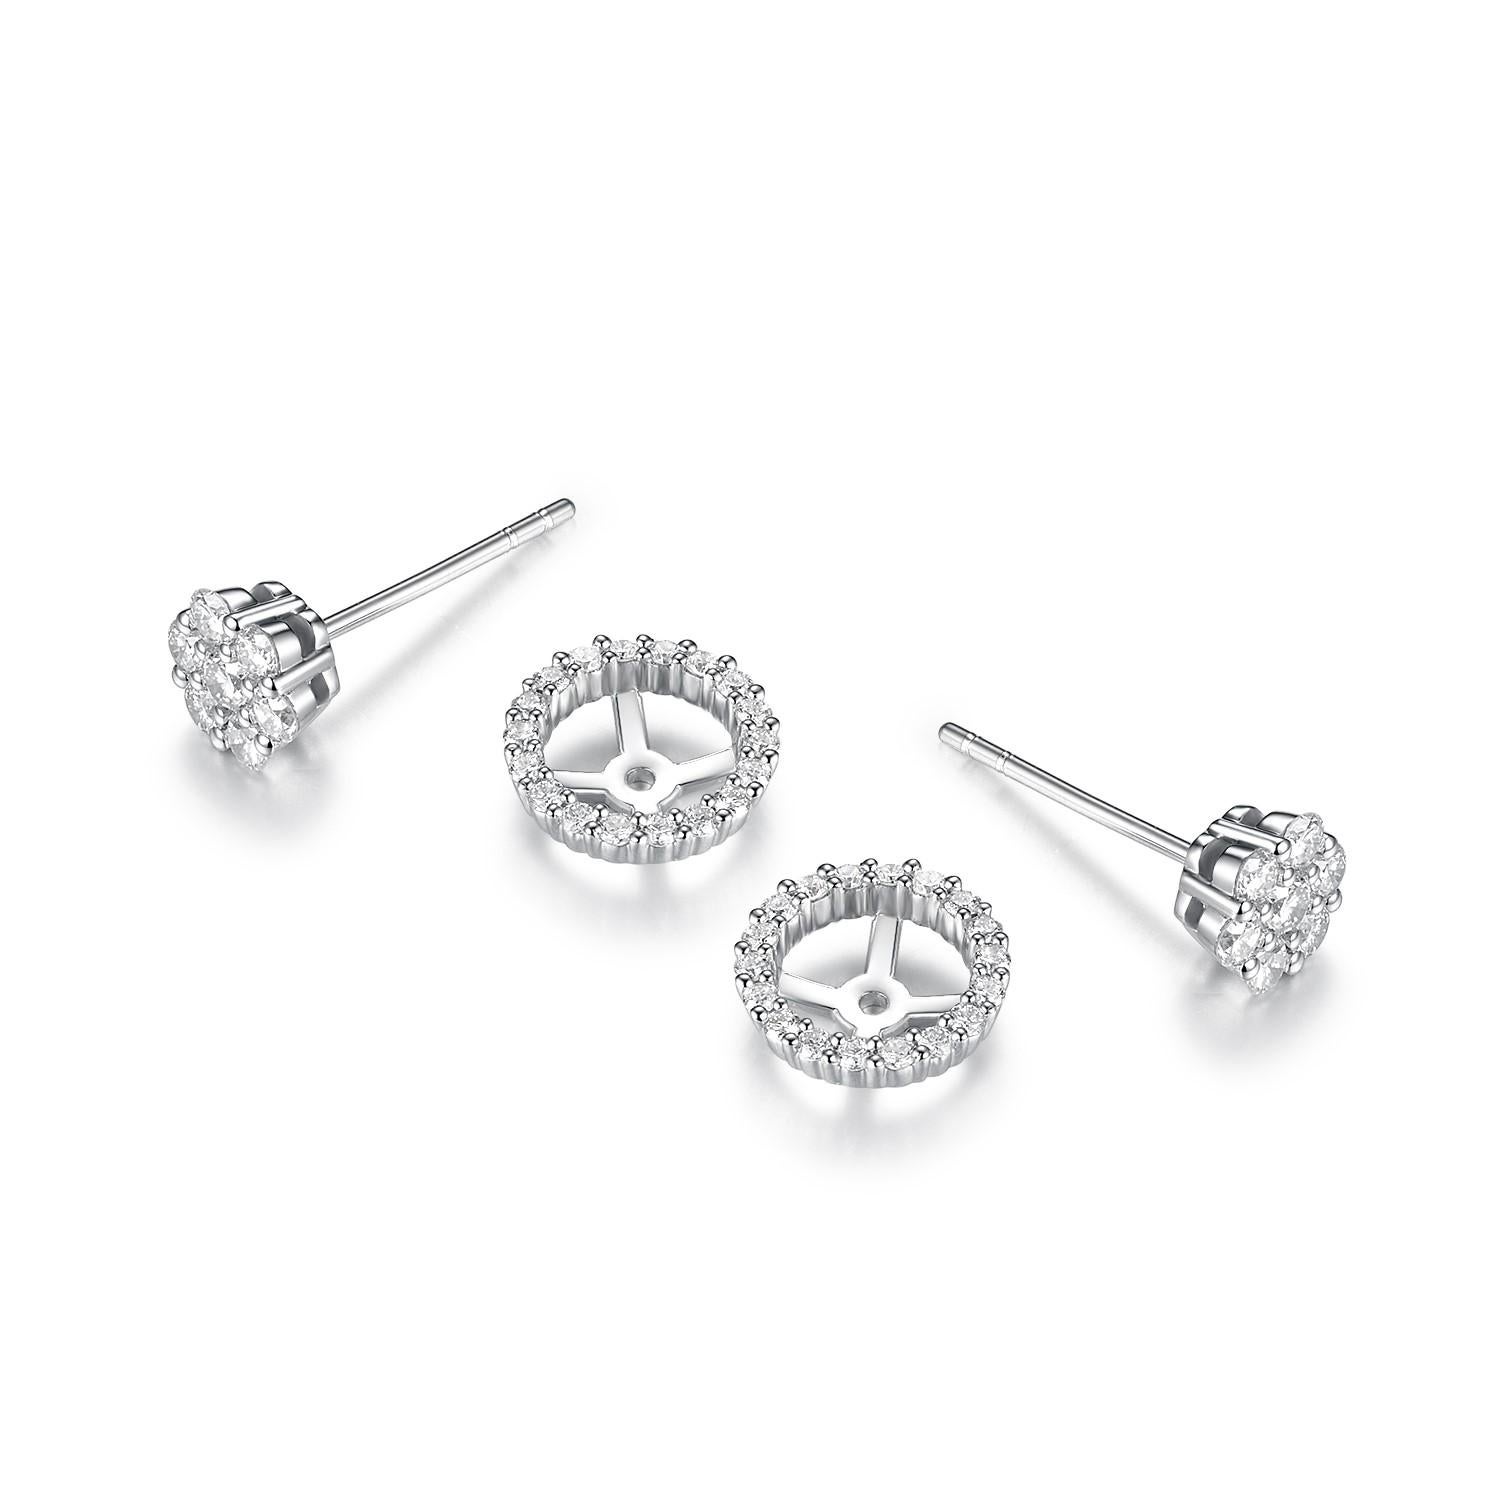 These Diamond Cluster Stud Earrings with a Diamond Halo Jacket are a stunning pair of earrings crafted in 18 karat white gold. They feature a total of 0.86 carats of round diamonds, creating a beautiful display of brilliance and sparkle.

The center